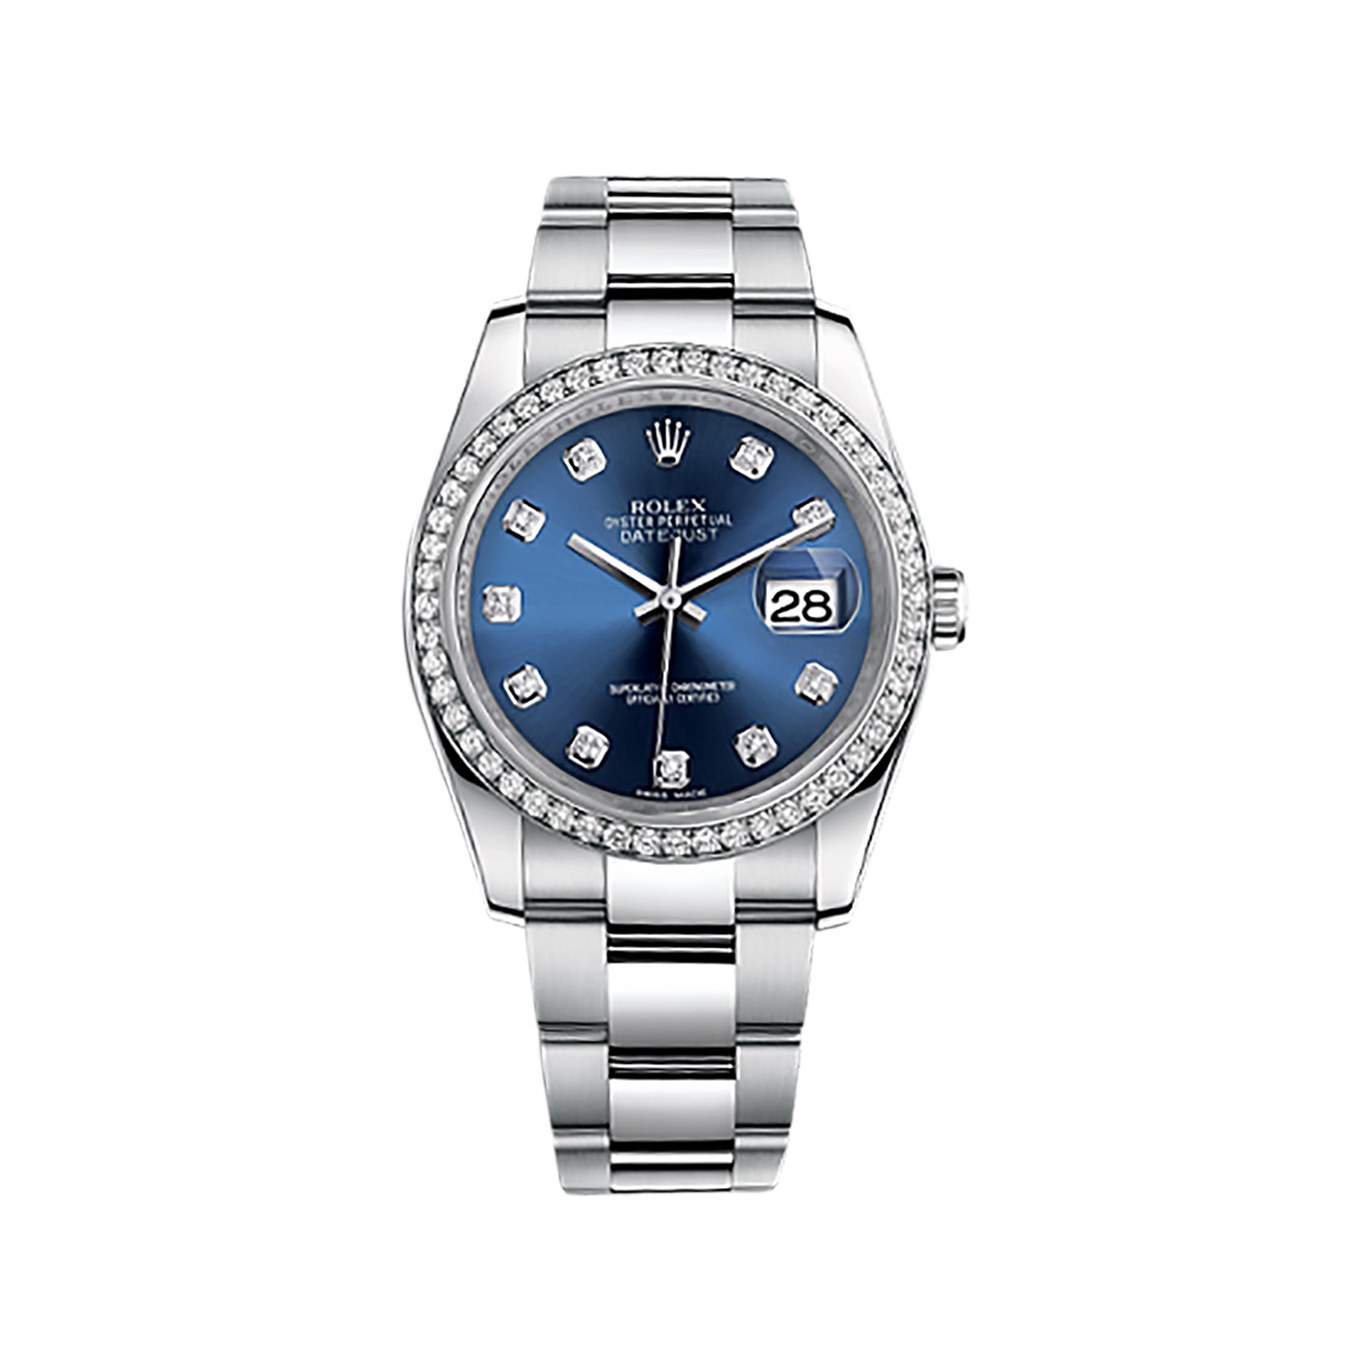 Datejust 36 116244 White Gold & Stainless Steel Watch (Blue Set with Diamonds)